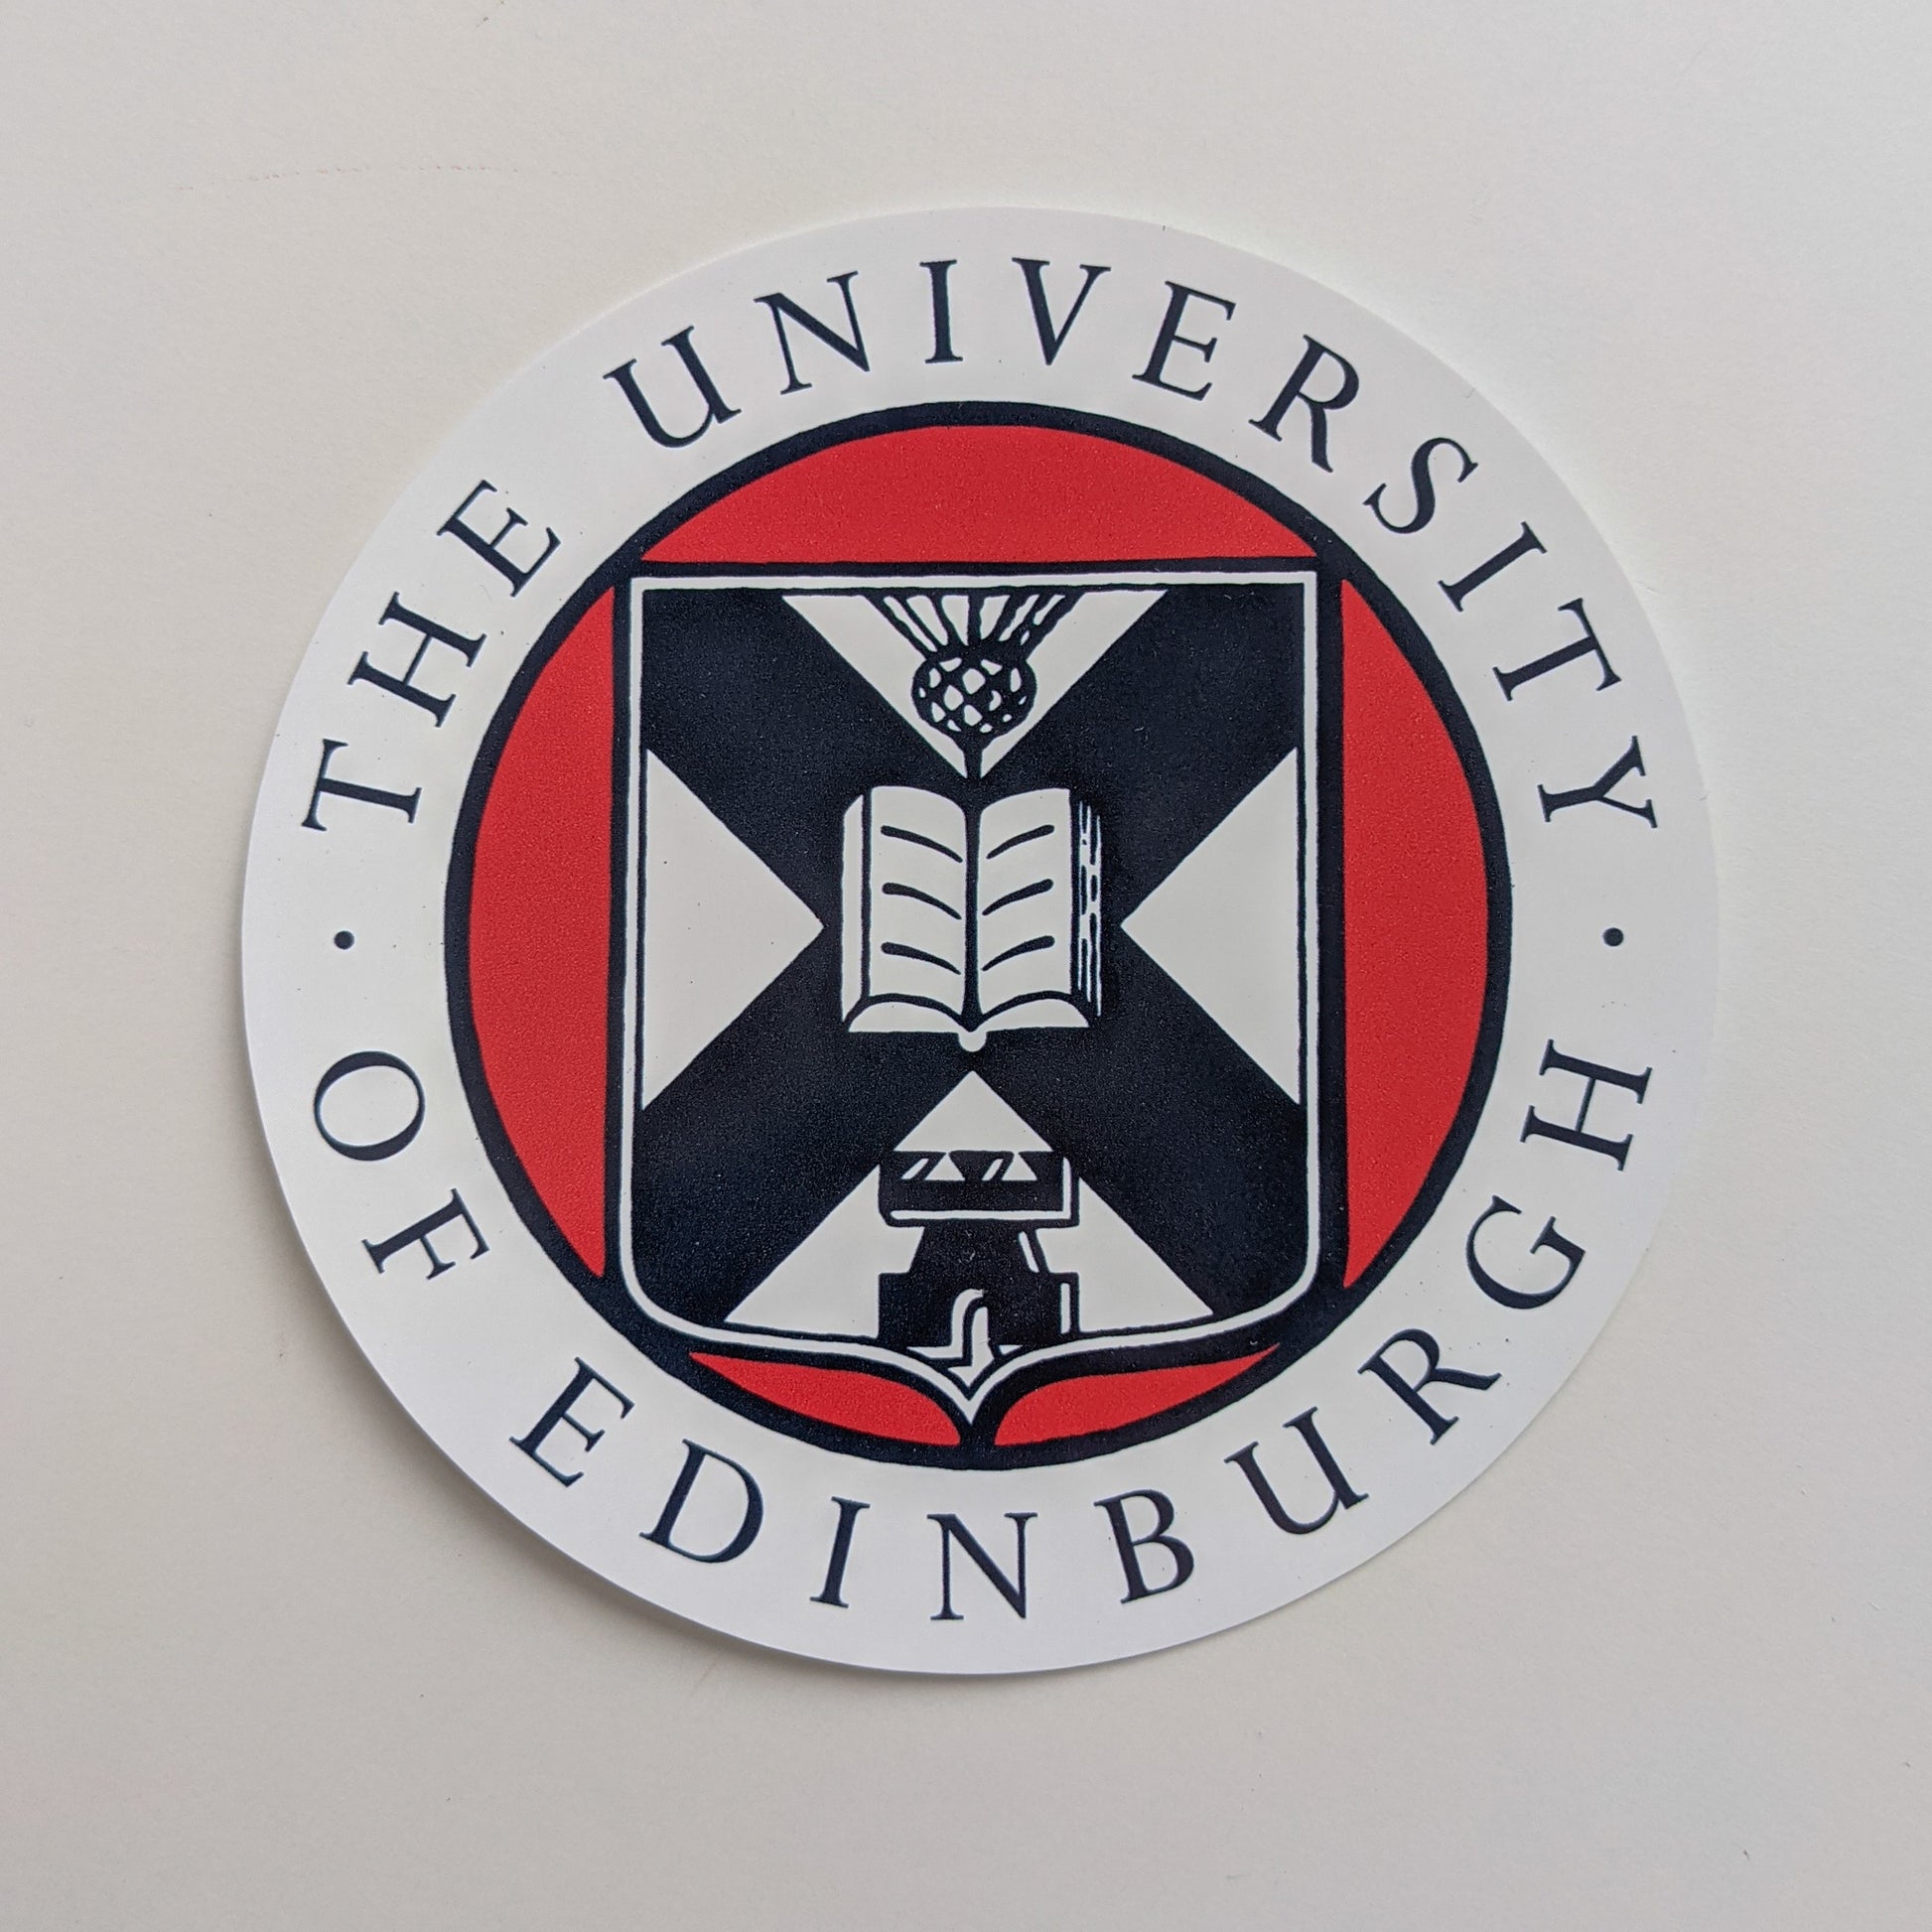 Circular sticker featuring the crest in full colour print. 